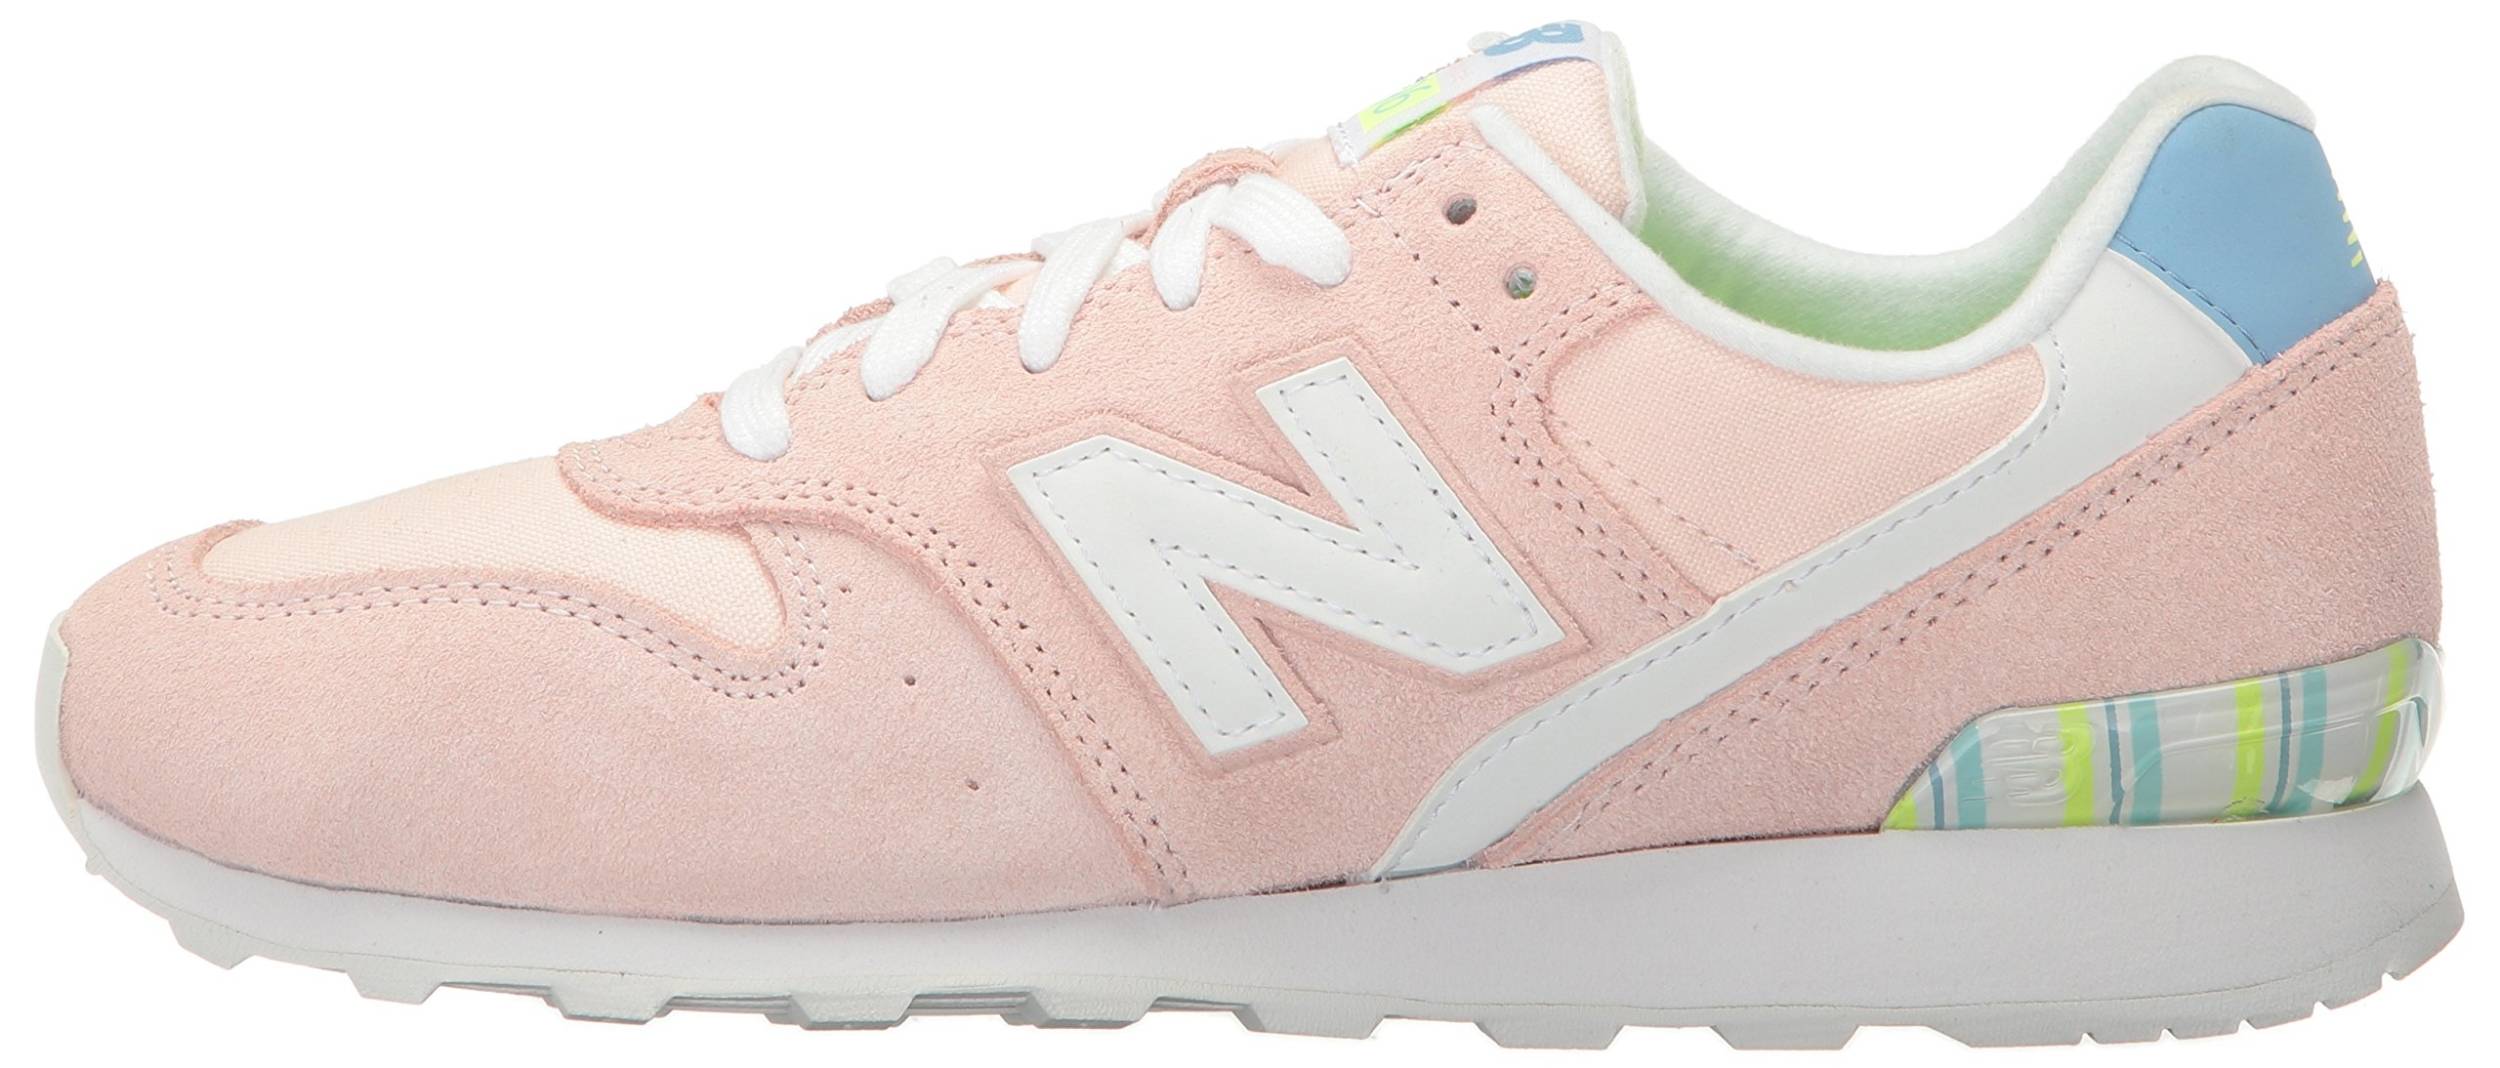 New Balance 696 sneakers (only $75) | RunRepeat